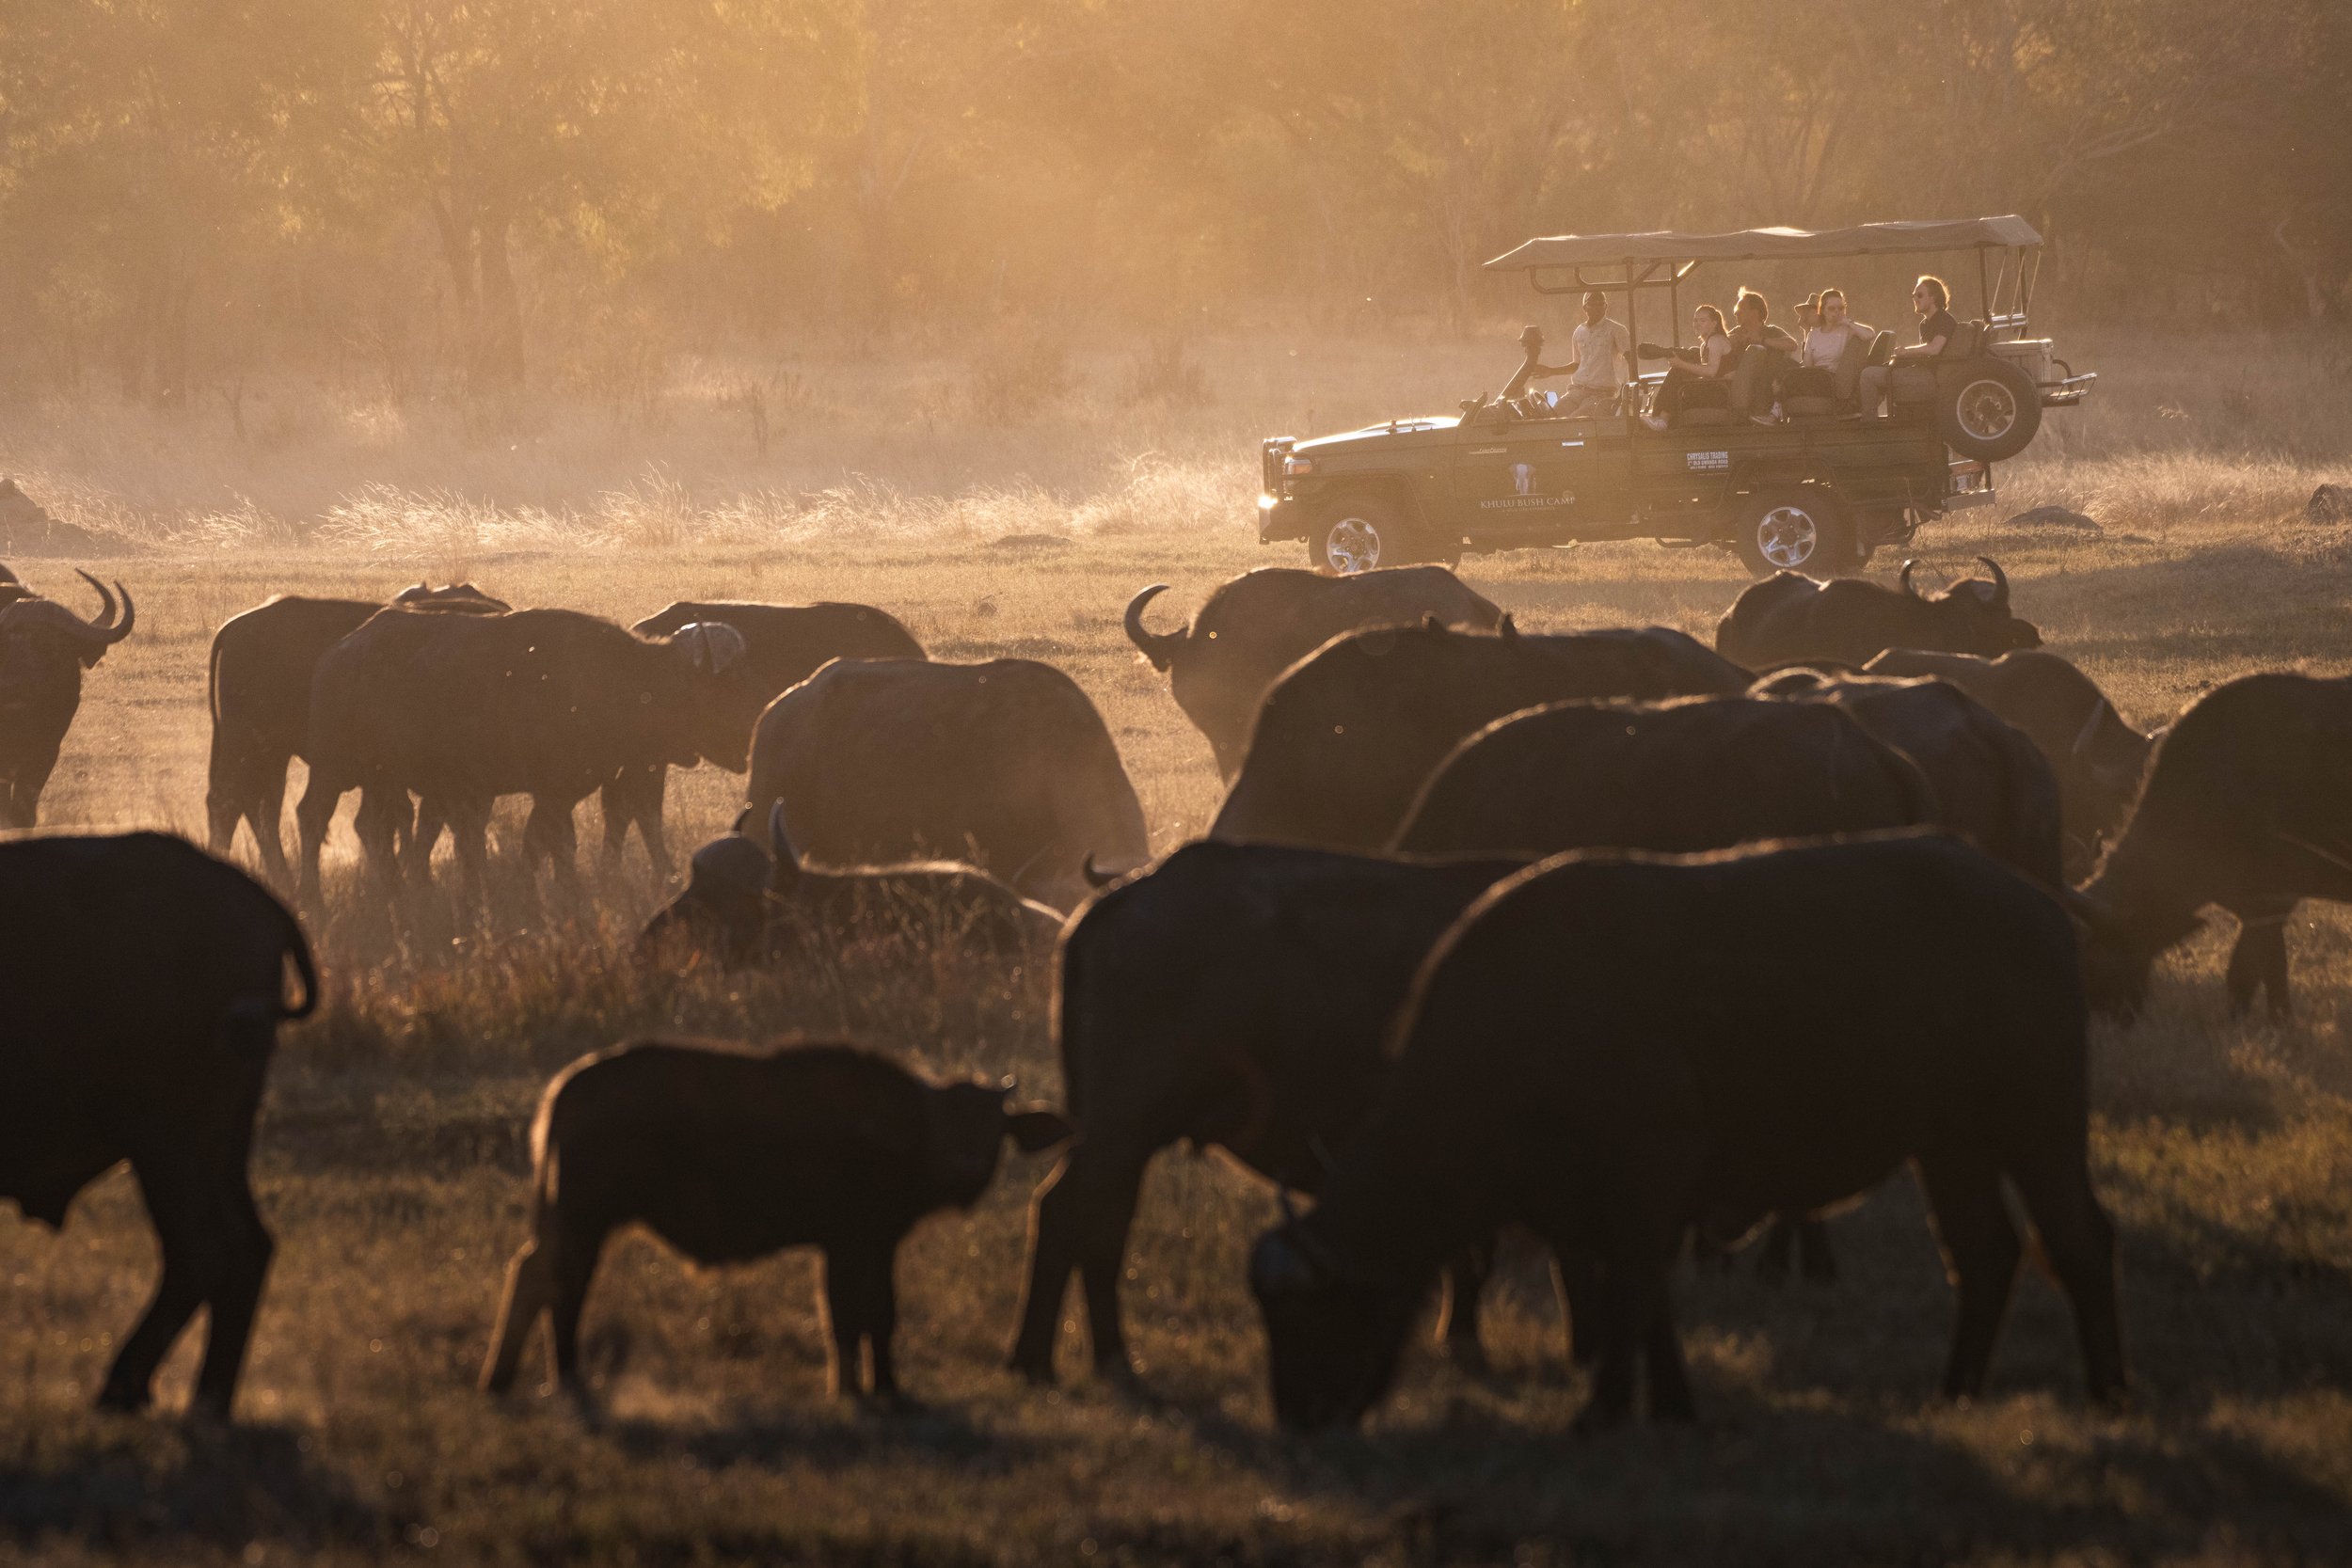 A group of buffalos in the field.